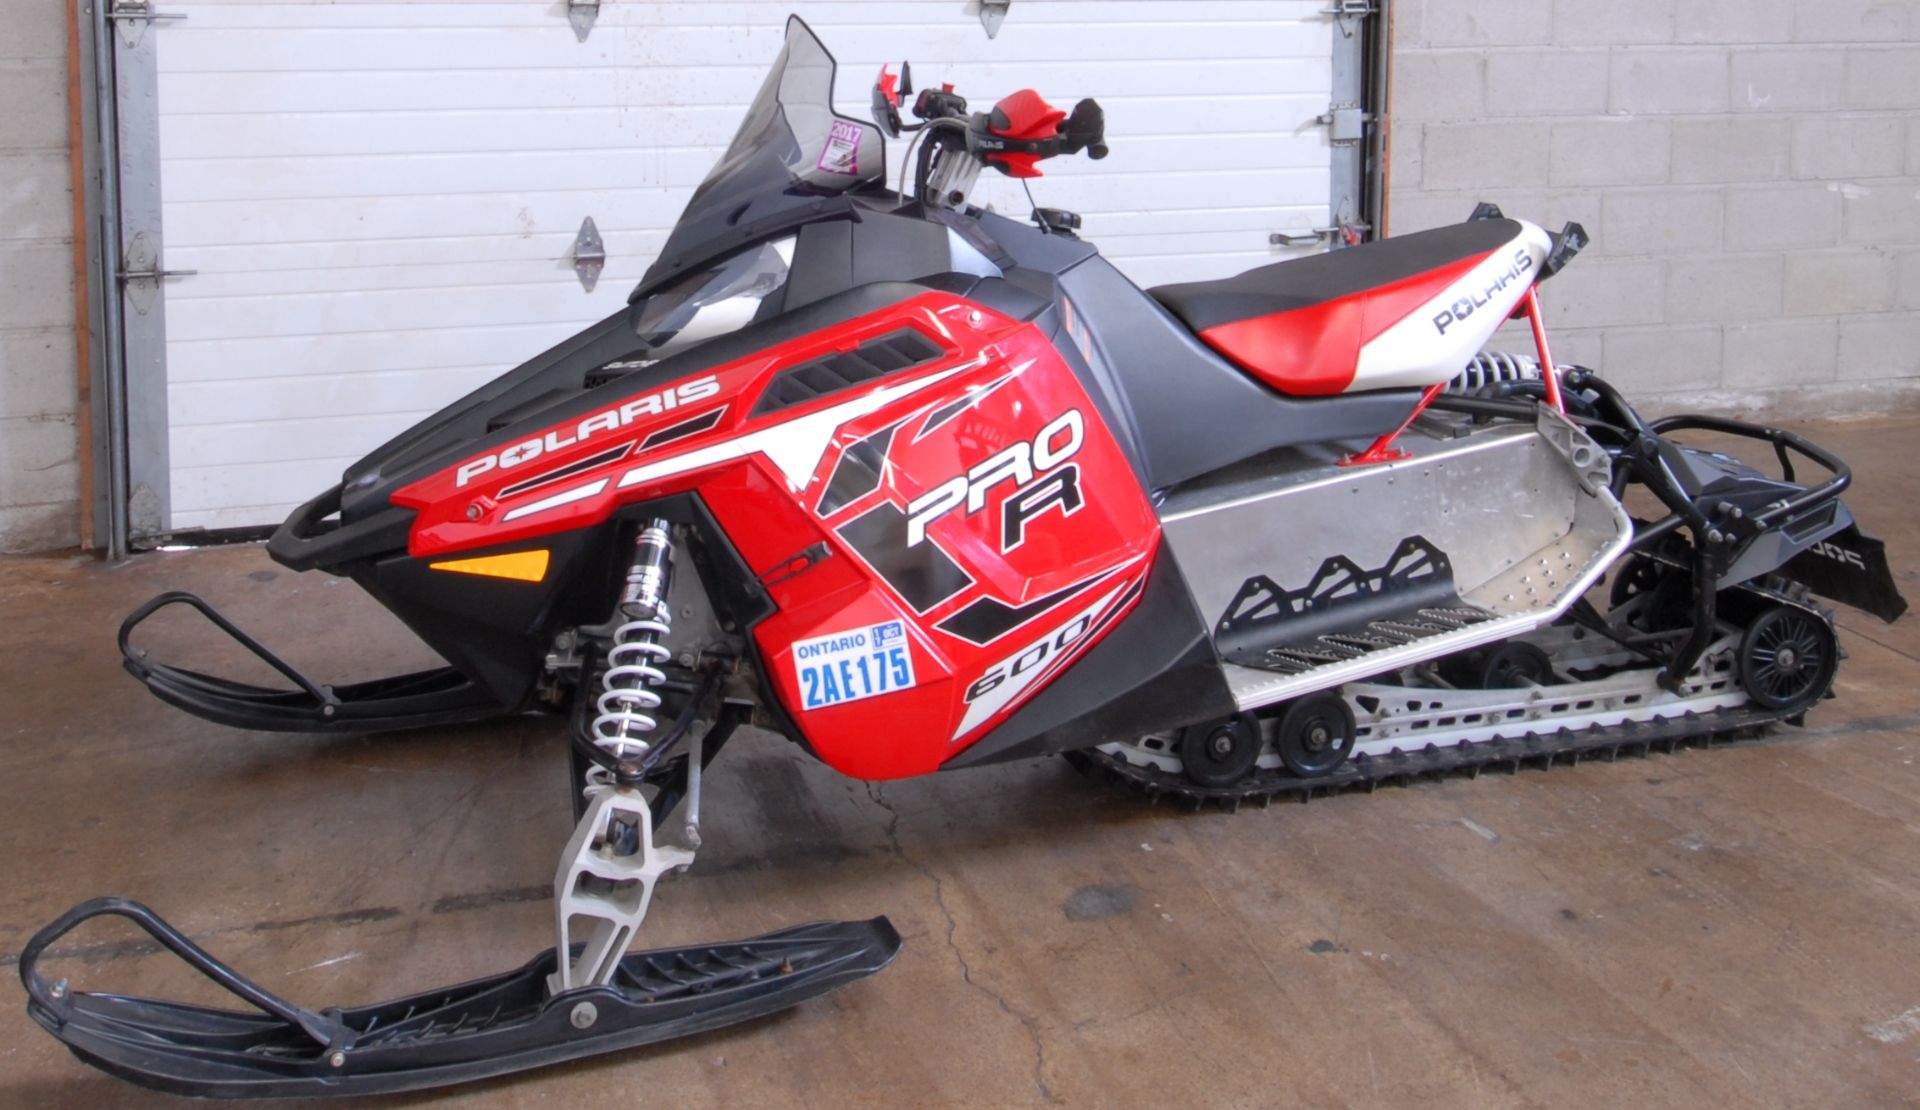 POLARIS (2012) PRO R600 SWITCH BACK SNOWMOBILE WITH R600 ENGINE